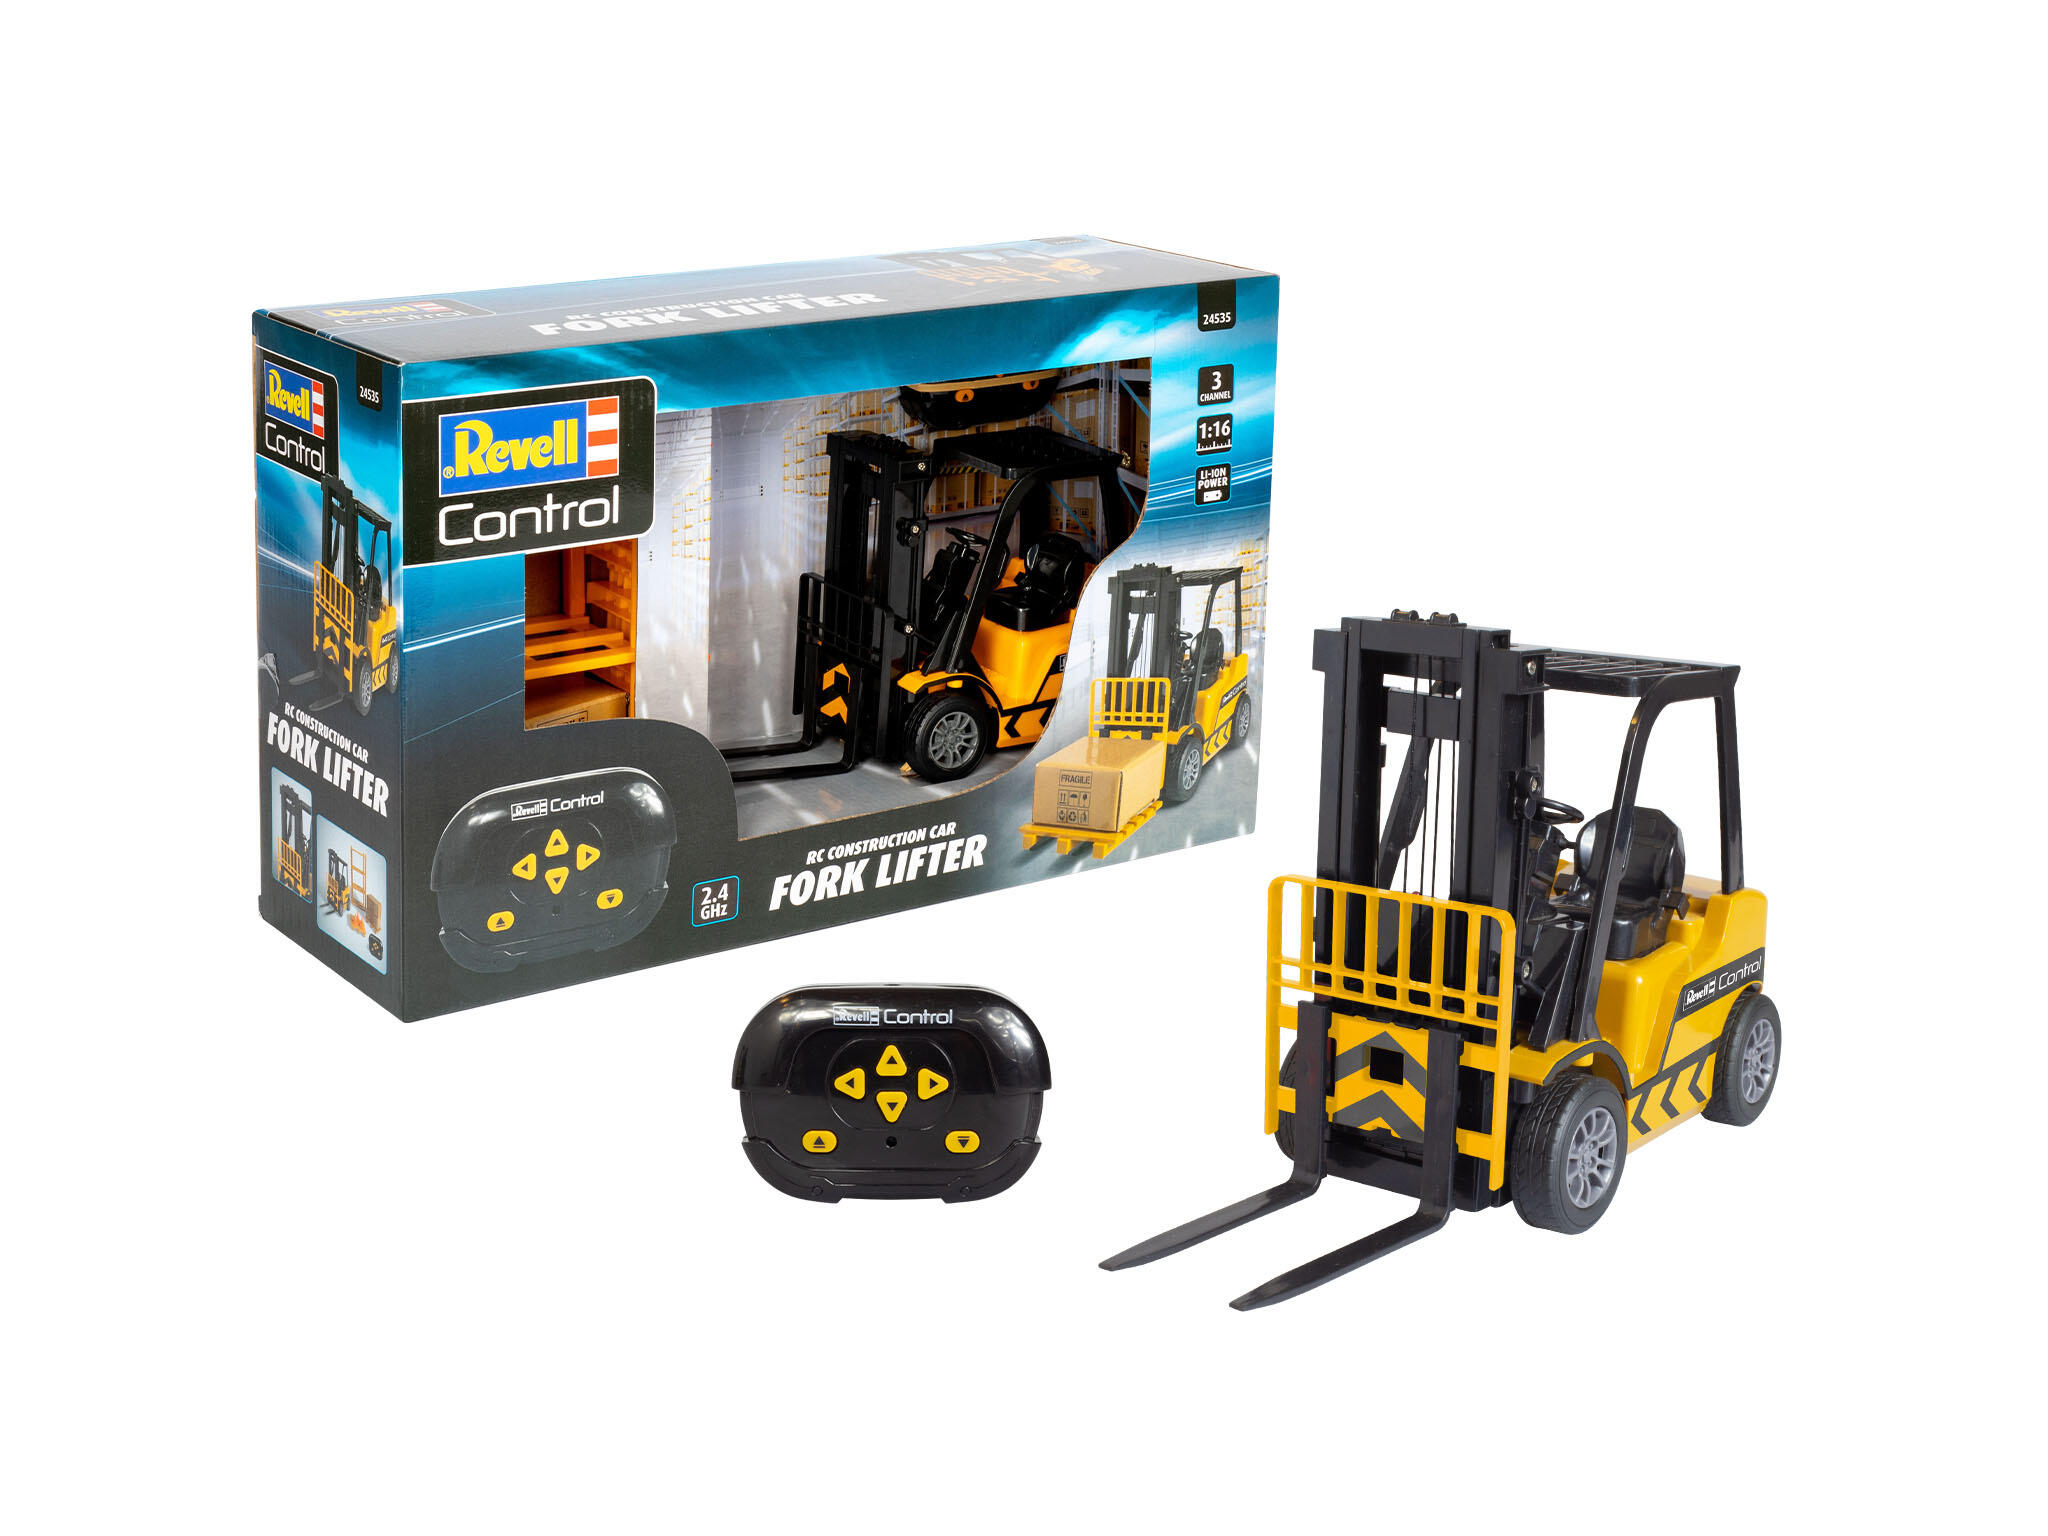 Revell 24535 RC Construction Car Forklifter Revell Control Ferngesteuertes Auto